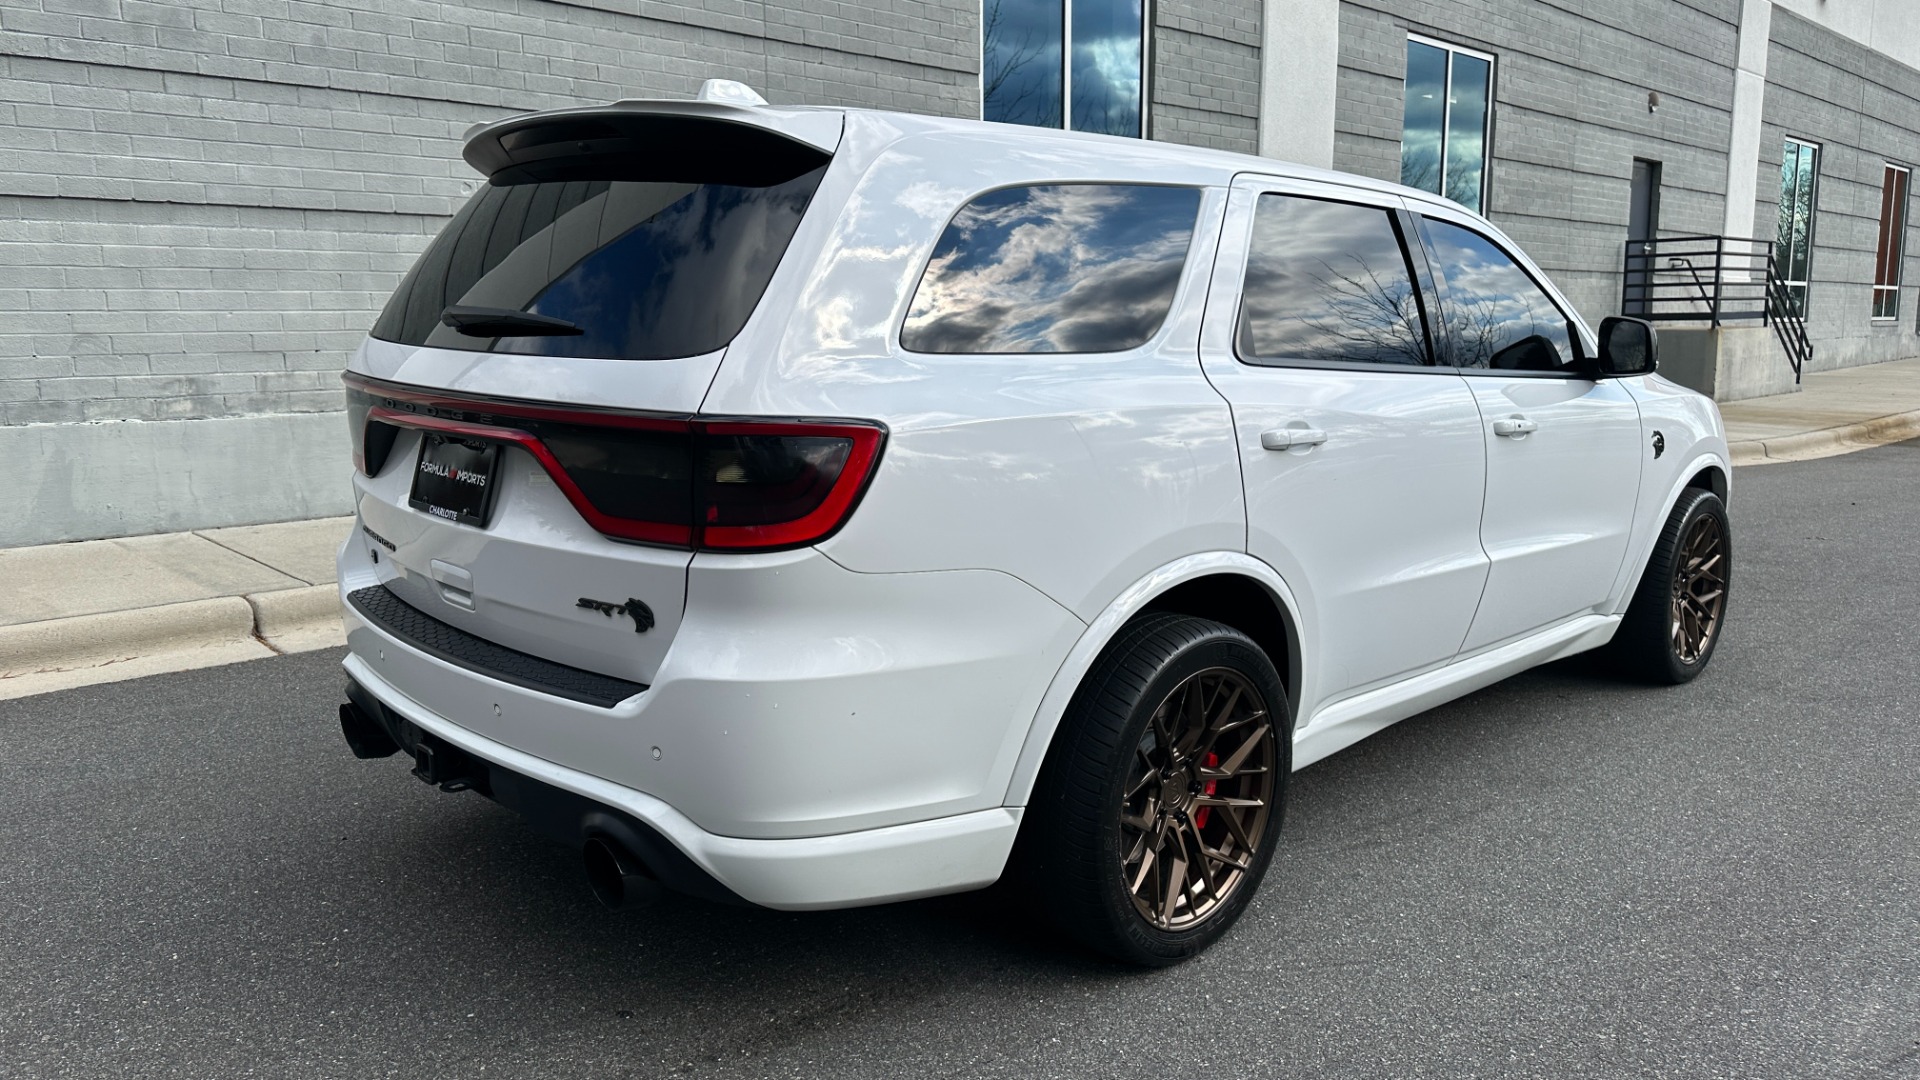 Used 2021 Dodge Durango SRT HELLCAT / LEGMAKER INTAKE / VARIANT WHEELS / EXHAUST for sale $74,950 at Formula Imports in Charlotte NC 28227 4